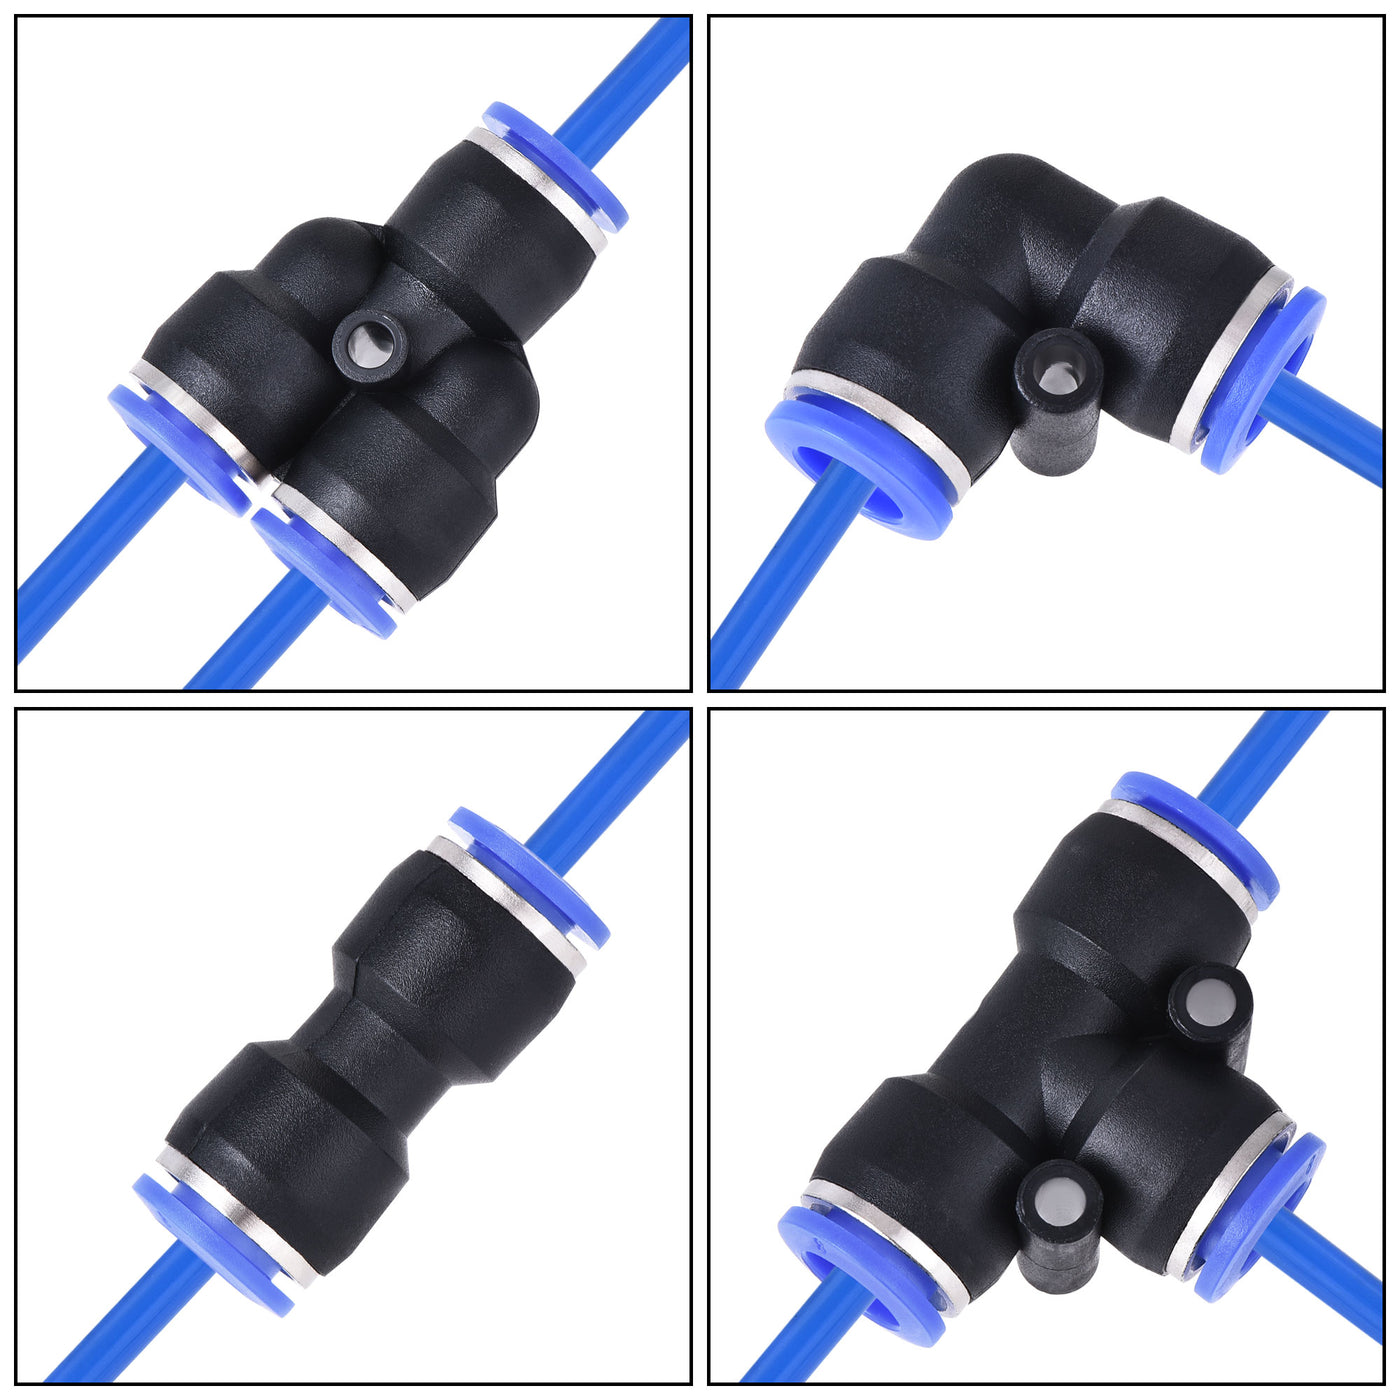 uxcell Uxcell Pneumatic 8mm OD PU Air Tubing Kit Hose Air Line Tubing 10M Blue with Push to Connect Fittings